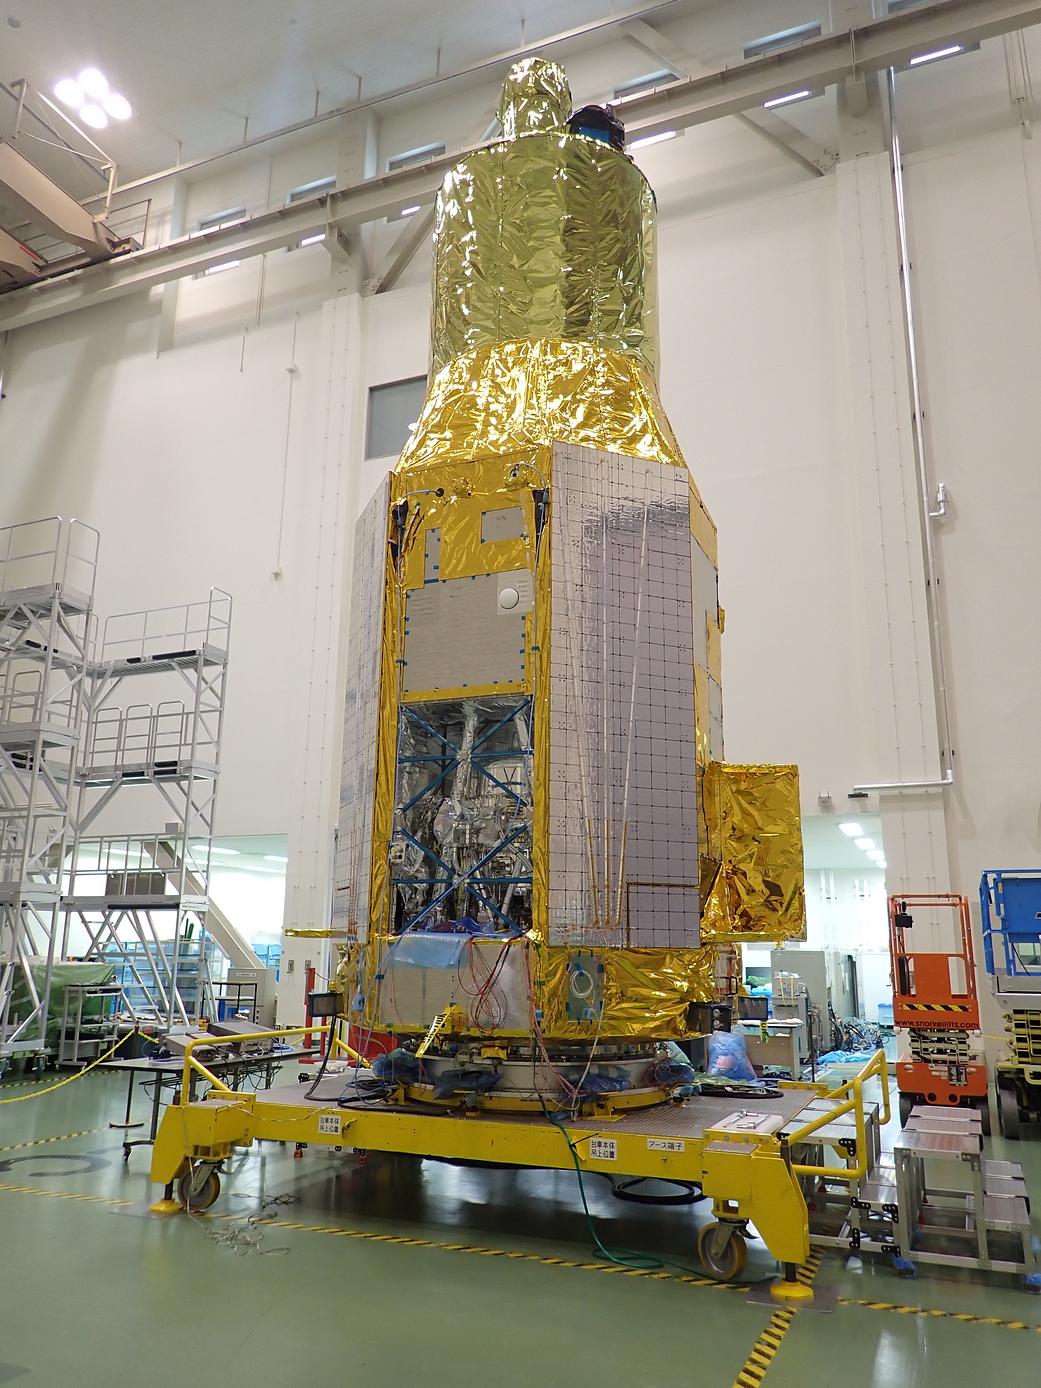 XRISM, covered in gold-colored insulation, stands ready at Japan's Tsukuba Space Center in May 2022 in preparation for tests. 